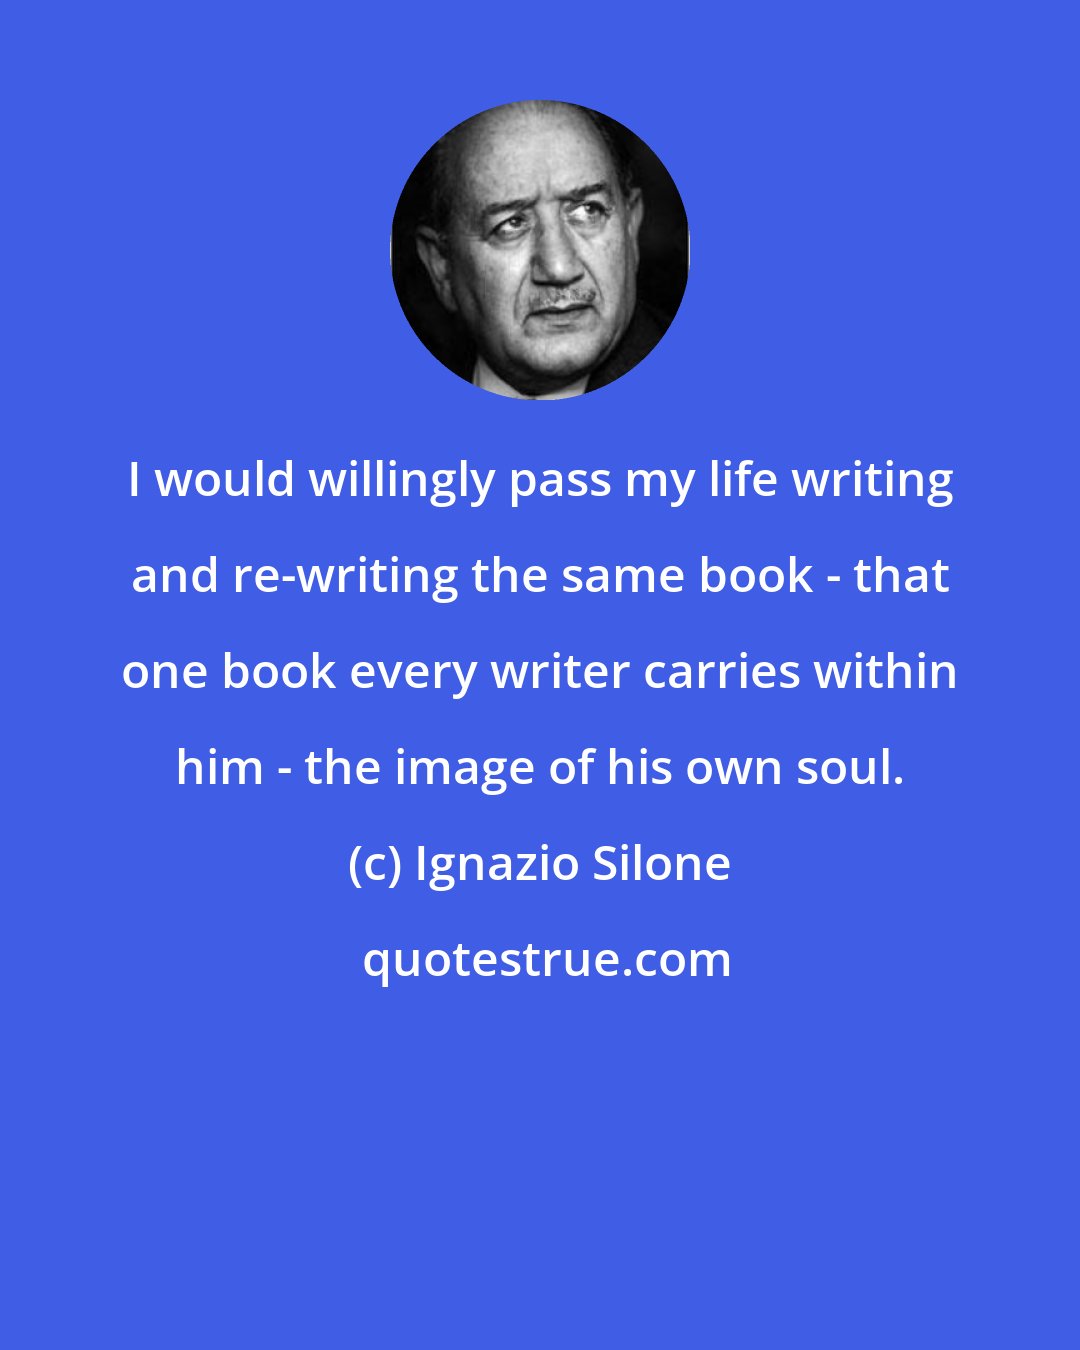 Ignazio Silone: I would willingly pass my life writing and re-writing the same book - that one book every writer carries within him - the image of his own soul.